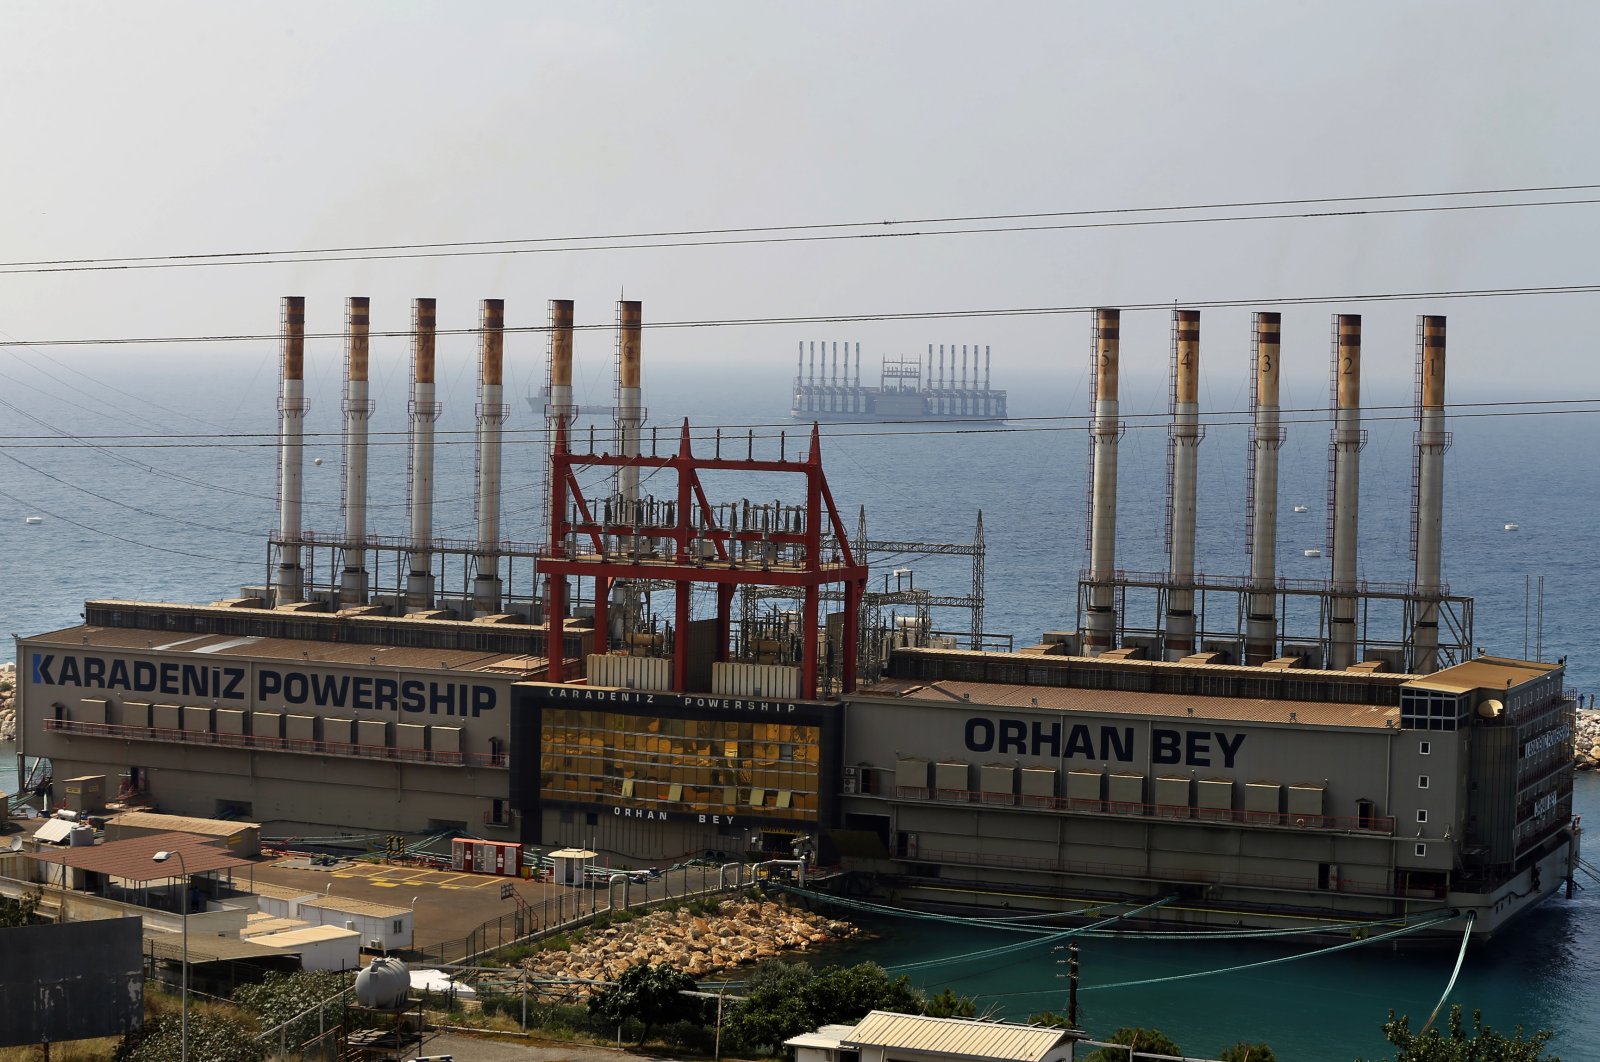 Karadeniz Powership Orhan Bey, foreground, and a second floating power station seen off the coast at Jiyeh, south of Beirut, Lebanon, July 16, 2018. (AP Photo)